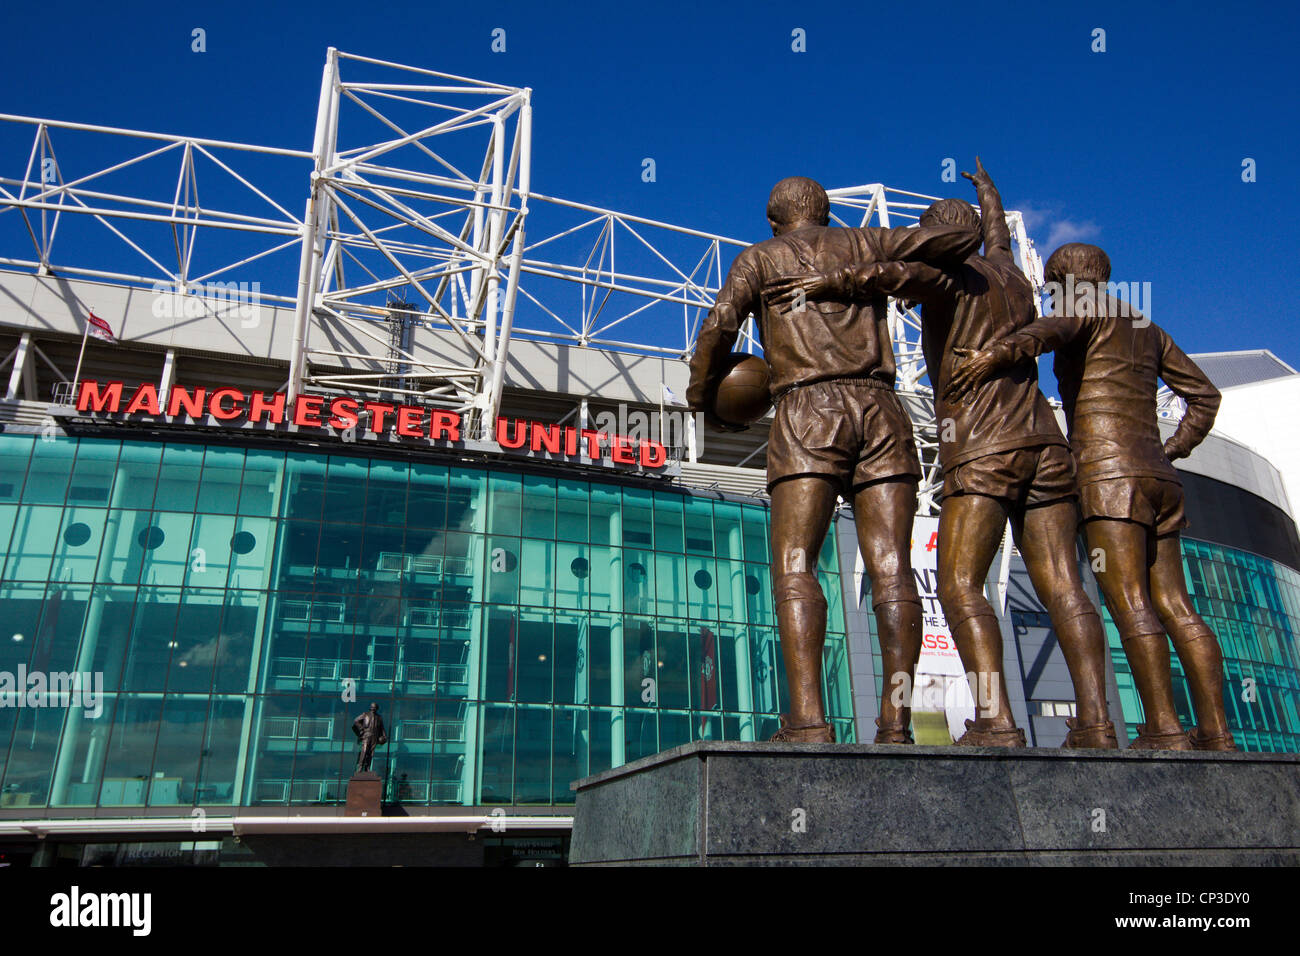 Manchester United Football Club Old Trafford, Greater Manchester Midlands England uk gb Stockfoto